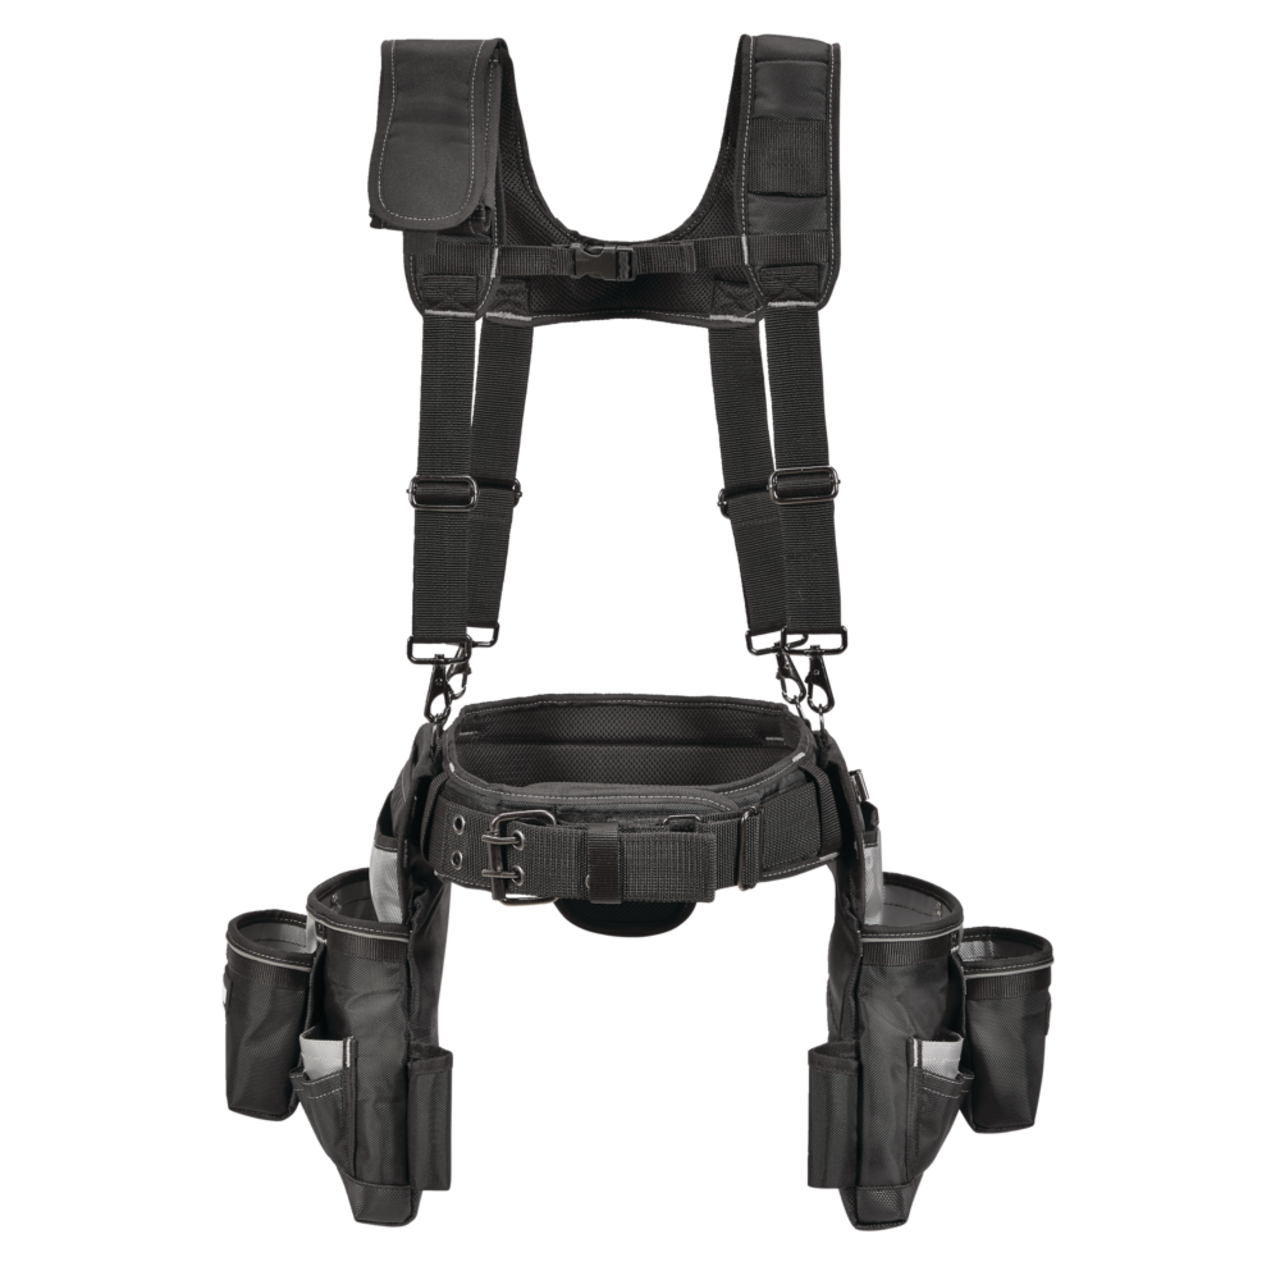 ICE Tactical 4 Point Suspenders